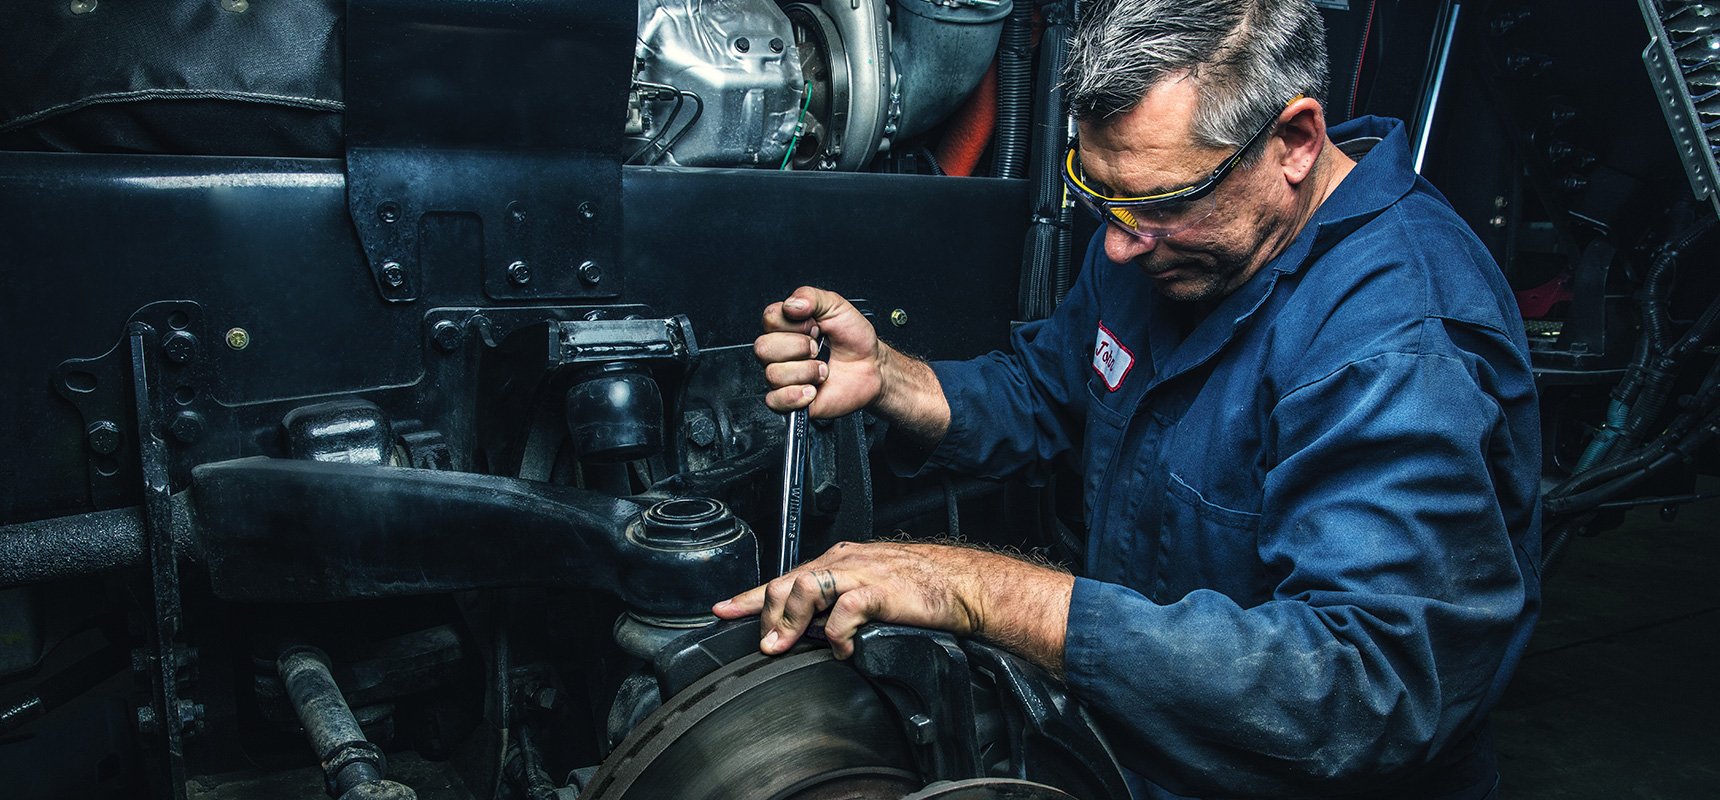 How to Become a Diesel Mechanic: Master the Art of Diesel Repair